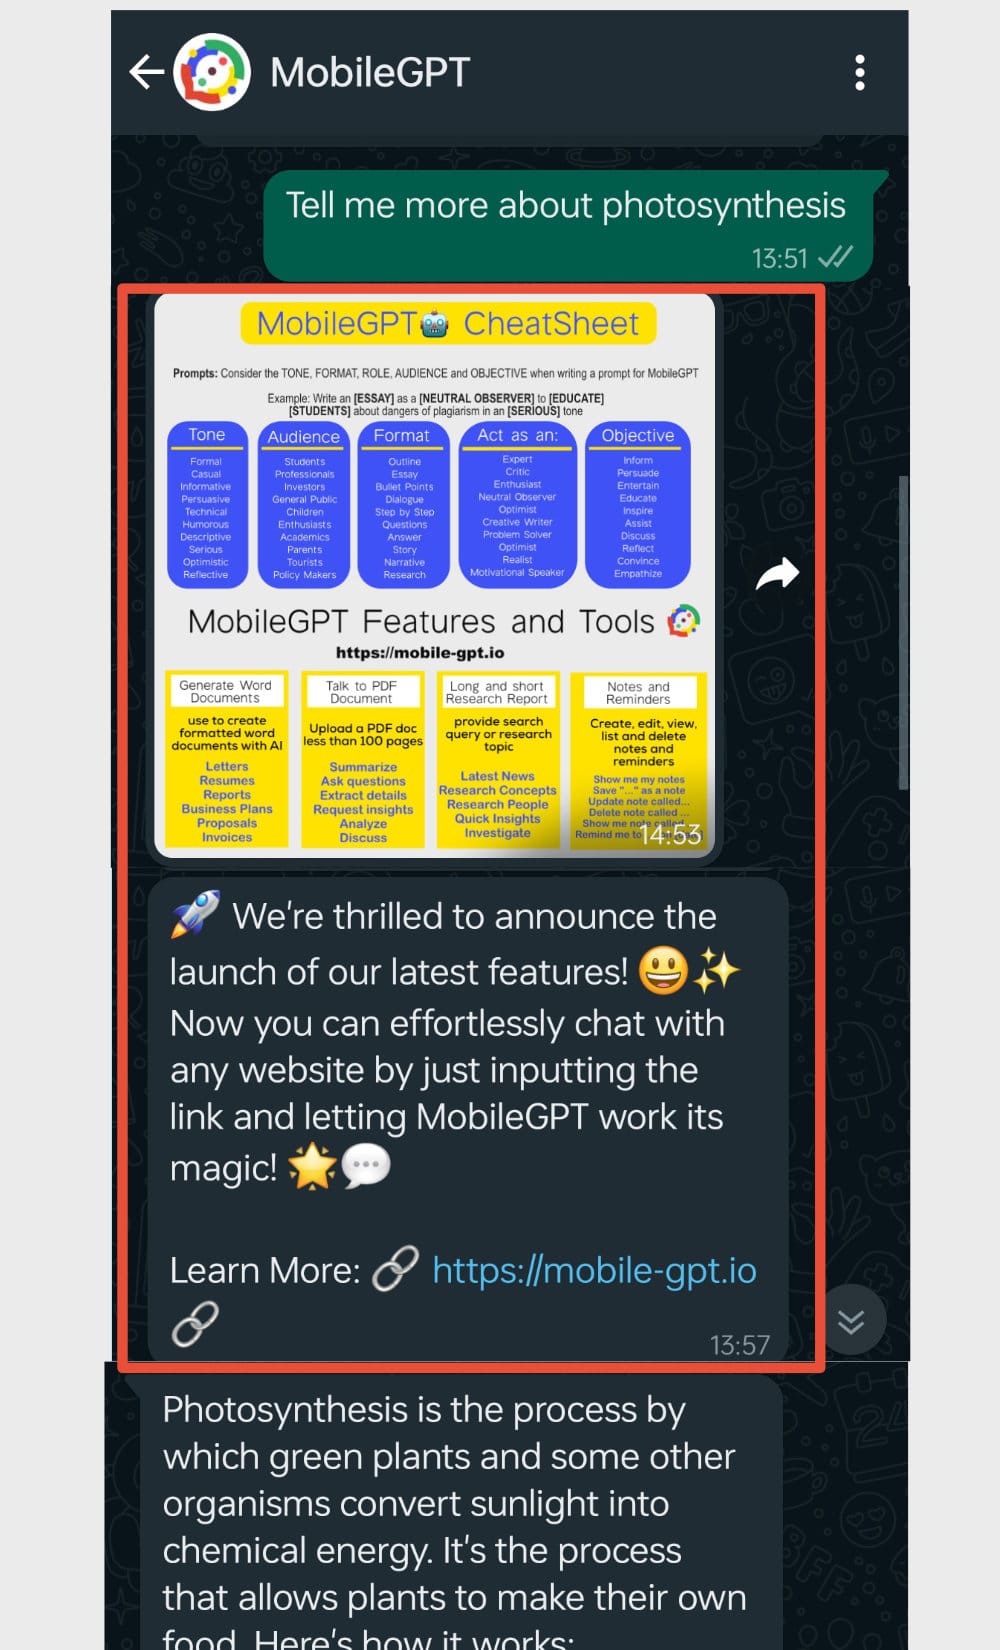 Mobile GPT Ads Image and Text